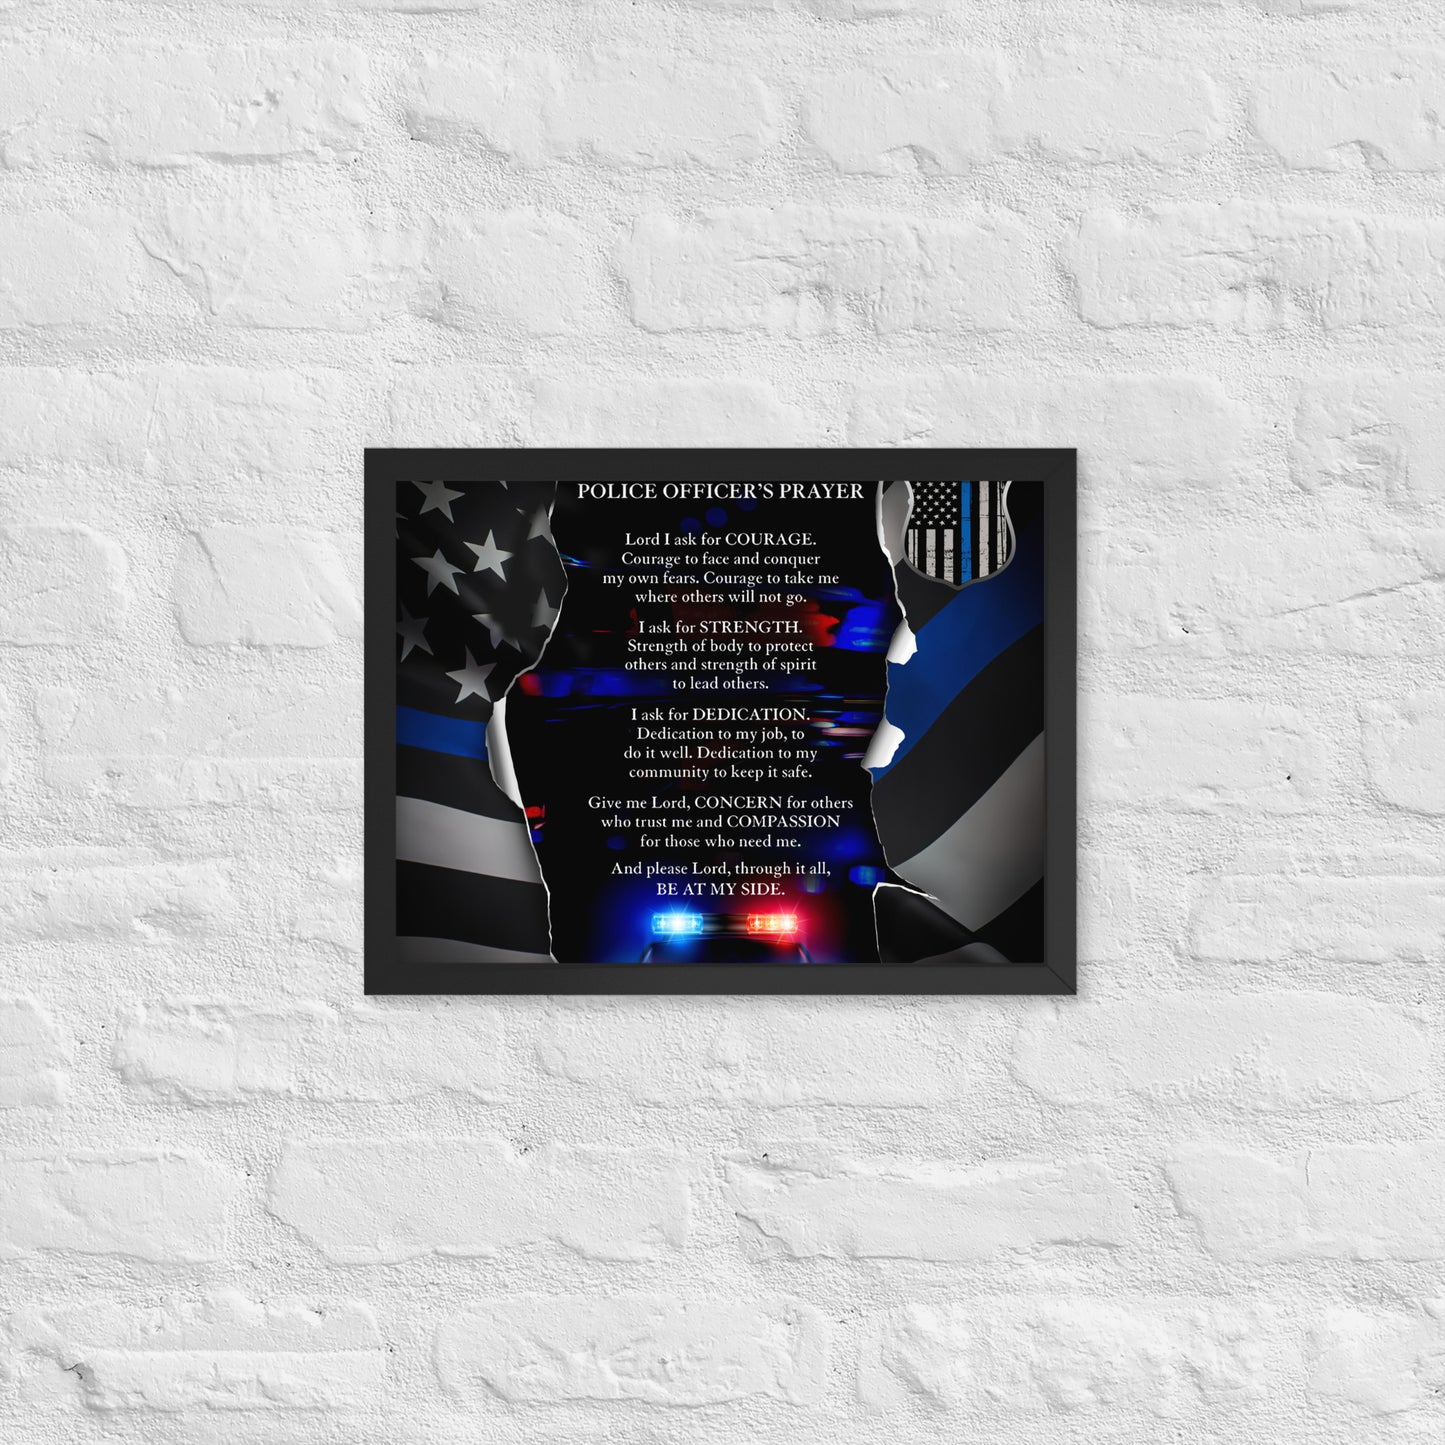 Police Officer Prayer Framed Photo Poster 12 By 16 Inches